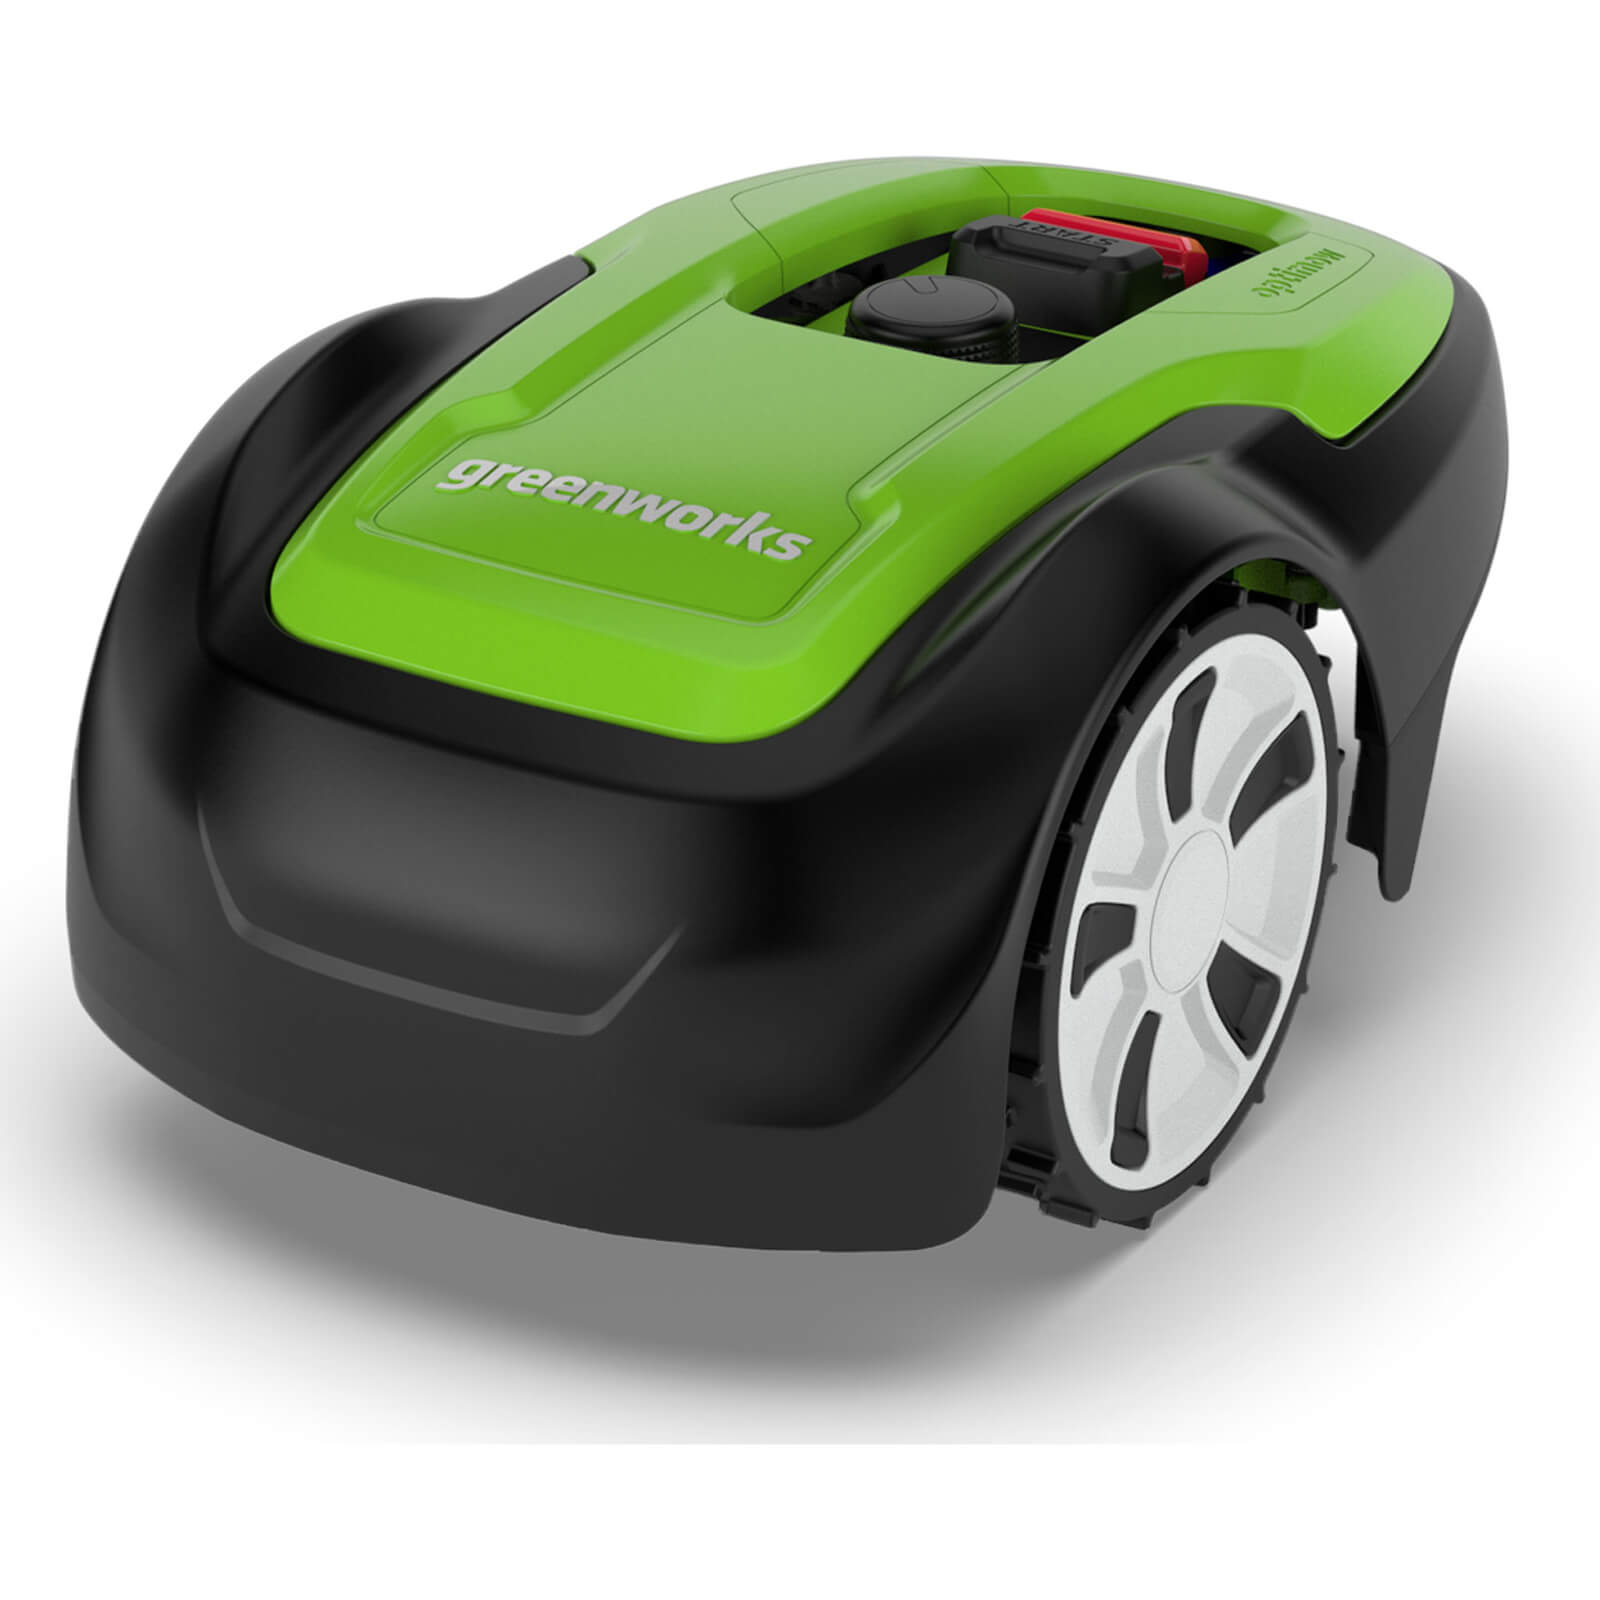 Image of Greenworks 24v Cordless Robotic Lawnmower 300m2 1 x 2ah Integrated Li-ion Charger